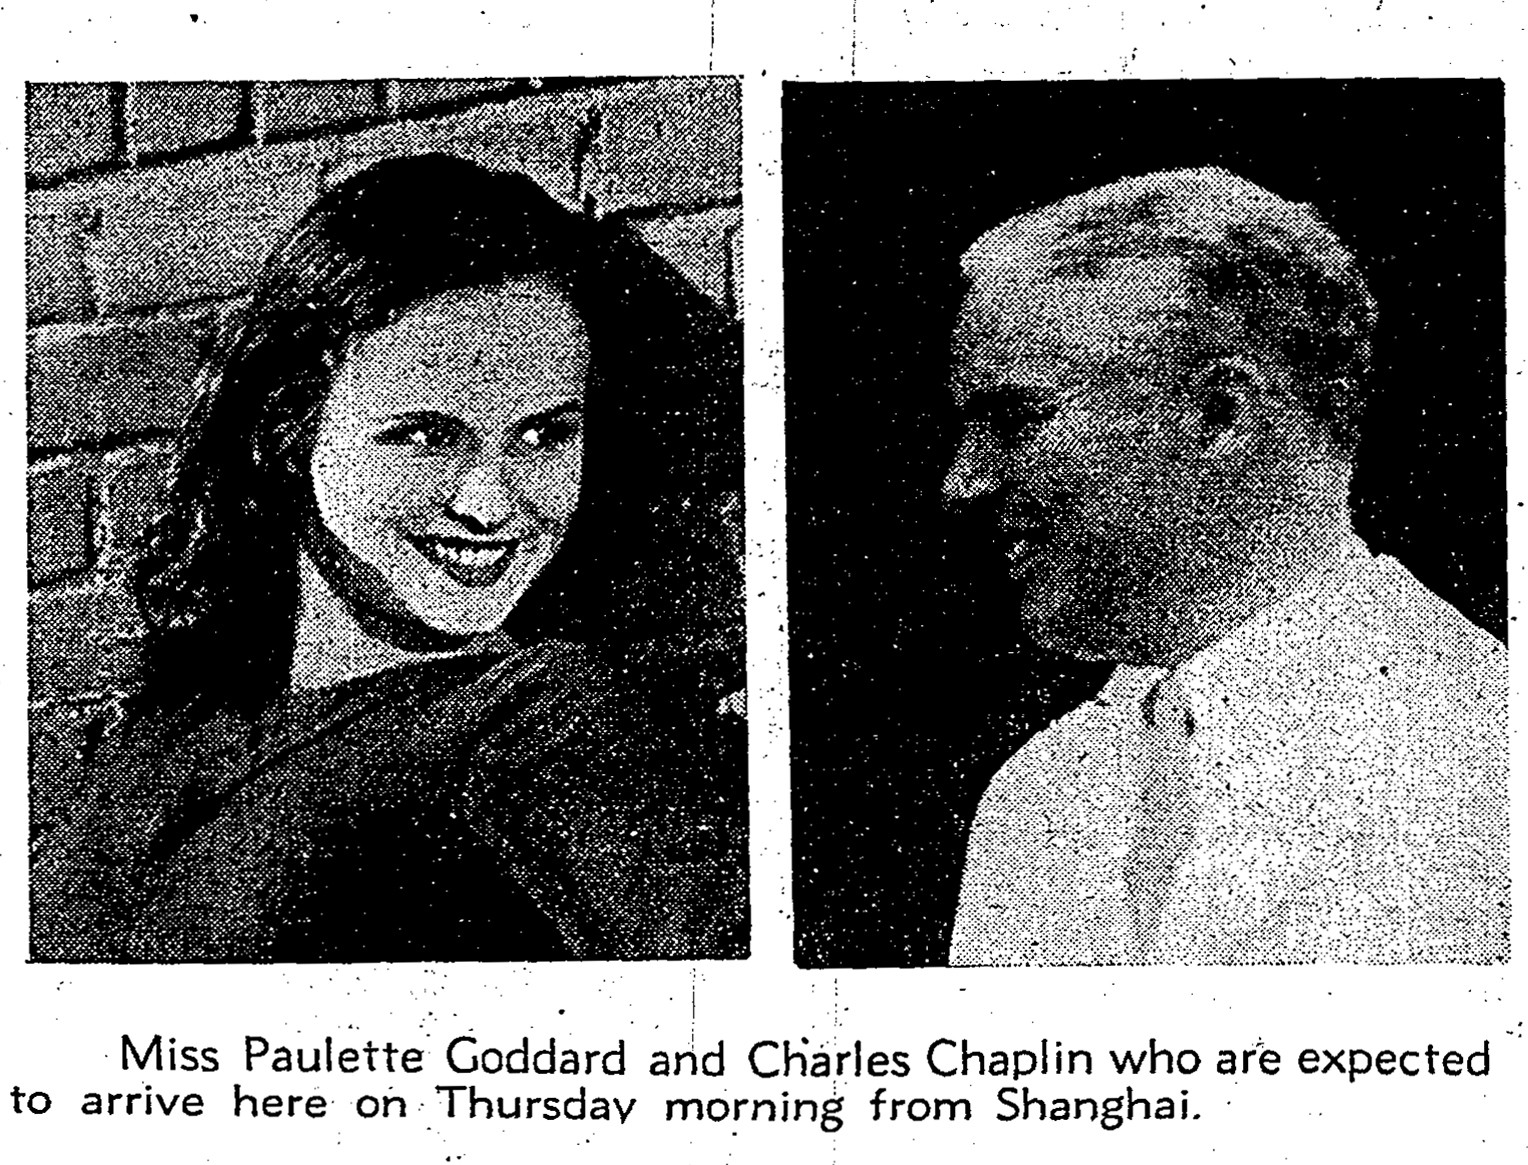 Paulette Goddard and Charlie Chaplin. Picture: SCMP